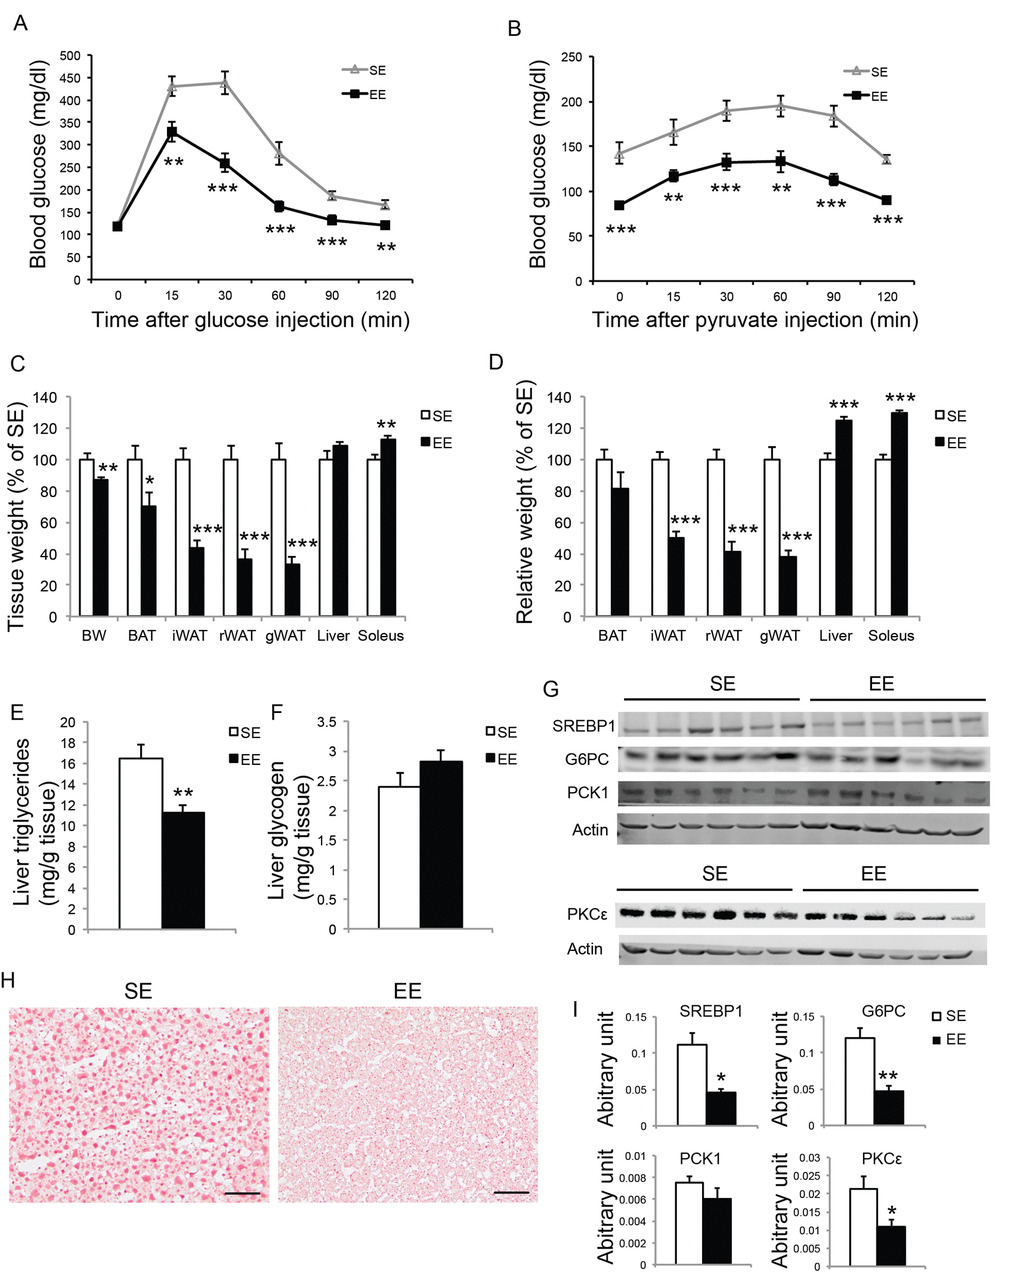 Short-term EE modulates liver phenotypes in middle age mice. (A) Glucose tolerance test at 6-week in EE (n=10 per group). (B) Pyruvate tolerance test at 7-week in EE (n=10 per group). (C) Body and tissue weight at sacrifice after 8-week EE (n=10 per group). (D) Relative tissue mass calibrated to body weight (n=10 per group). (E) Liver triglycerides level (n=10 per group). (F) Liver glycogen level (n=10 per group). (G) Western blotting of livers. (H) Oil red O staining of livers. Scale bar, 50 µm. (I) Quantification of western blotting of the livers in (G), n=6 per group. * PPP